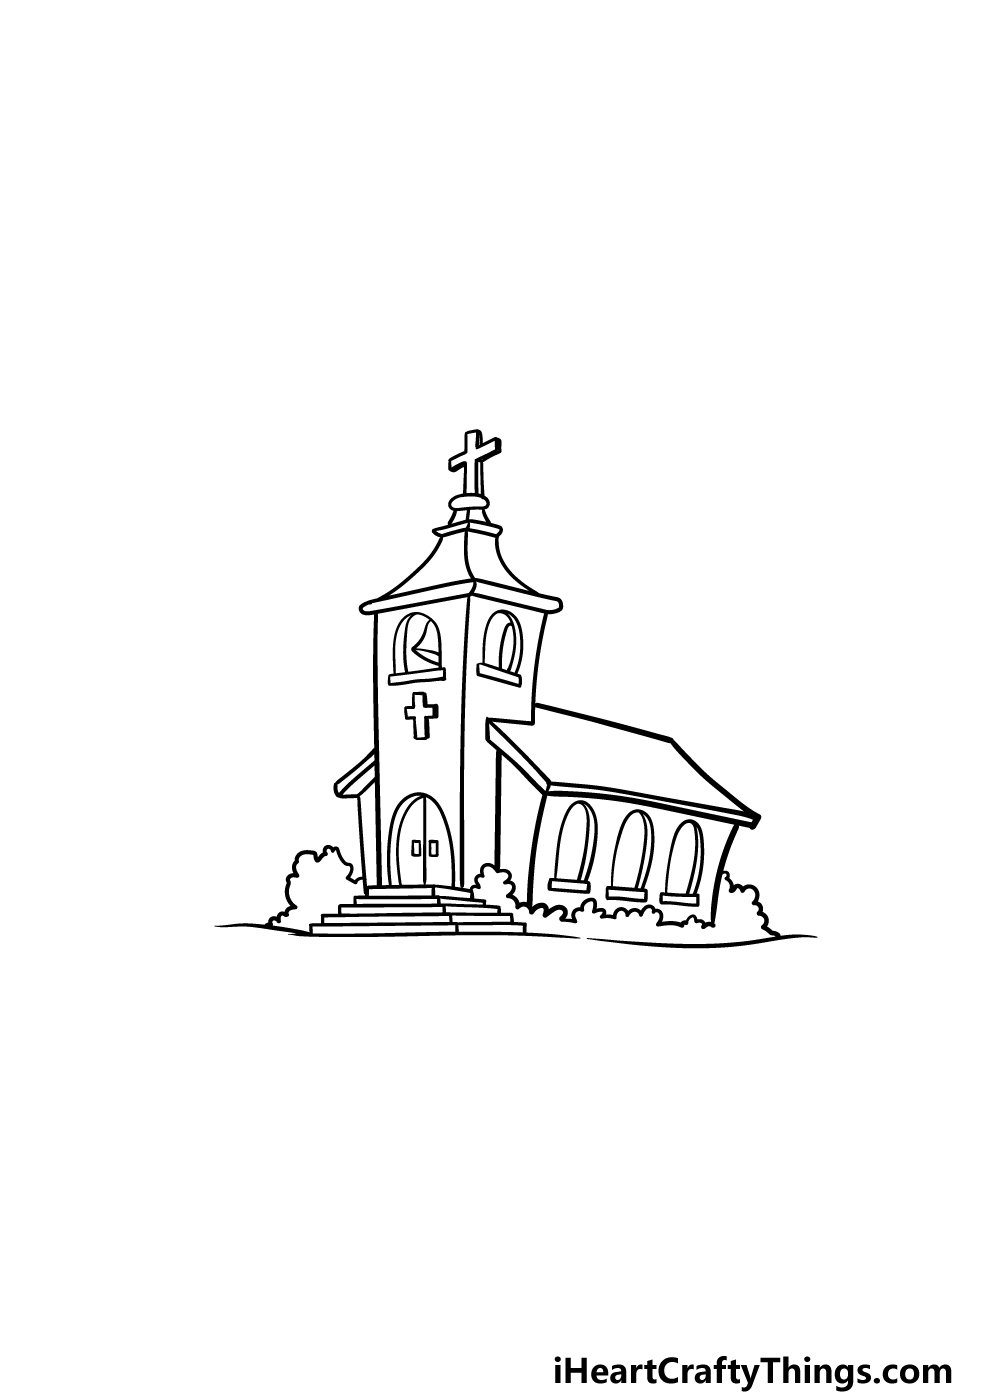 Simple black and white sketch a church Royalty Free Vector